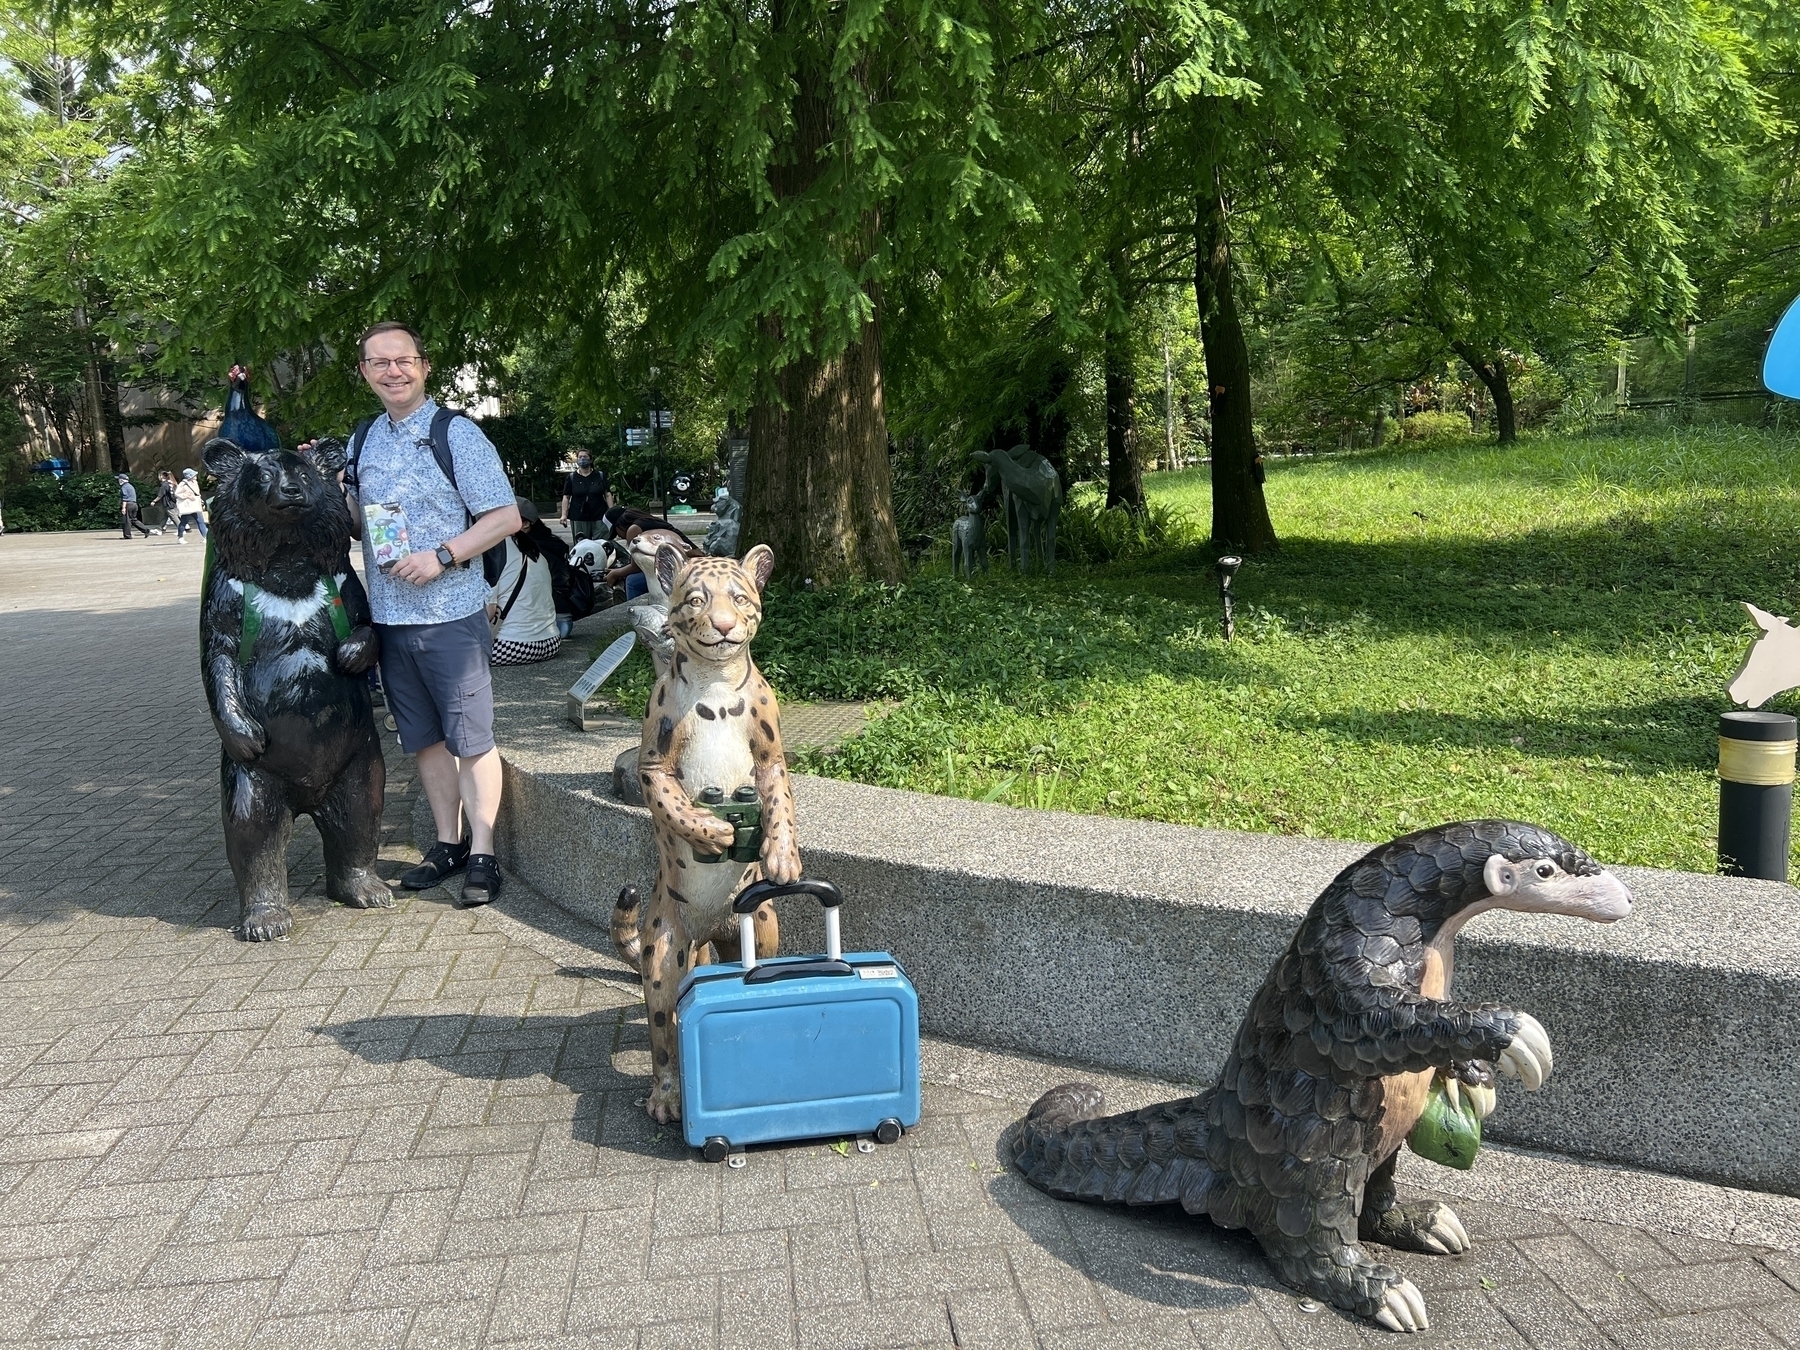 Chad poses with statues of animals like a sun bear, leopard, and pangolin at the zoo entrance